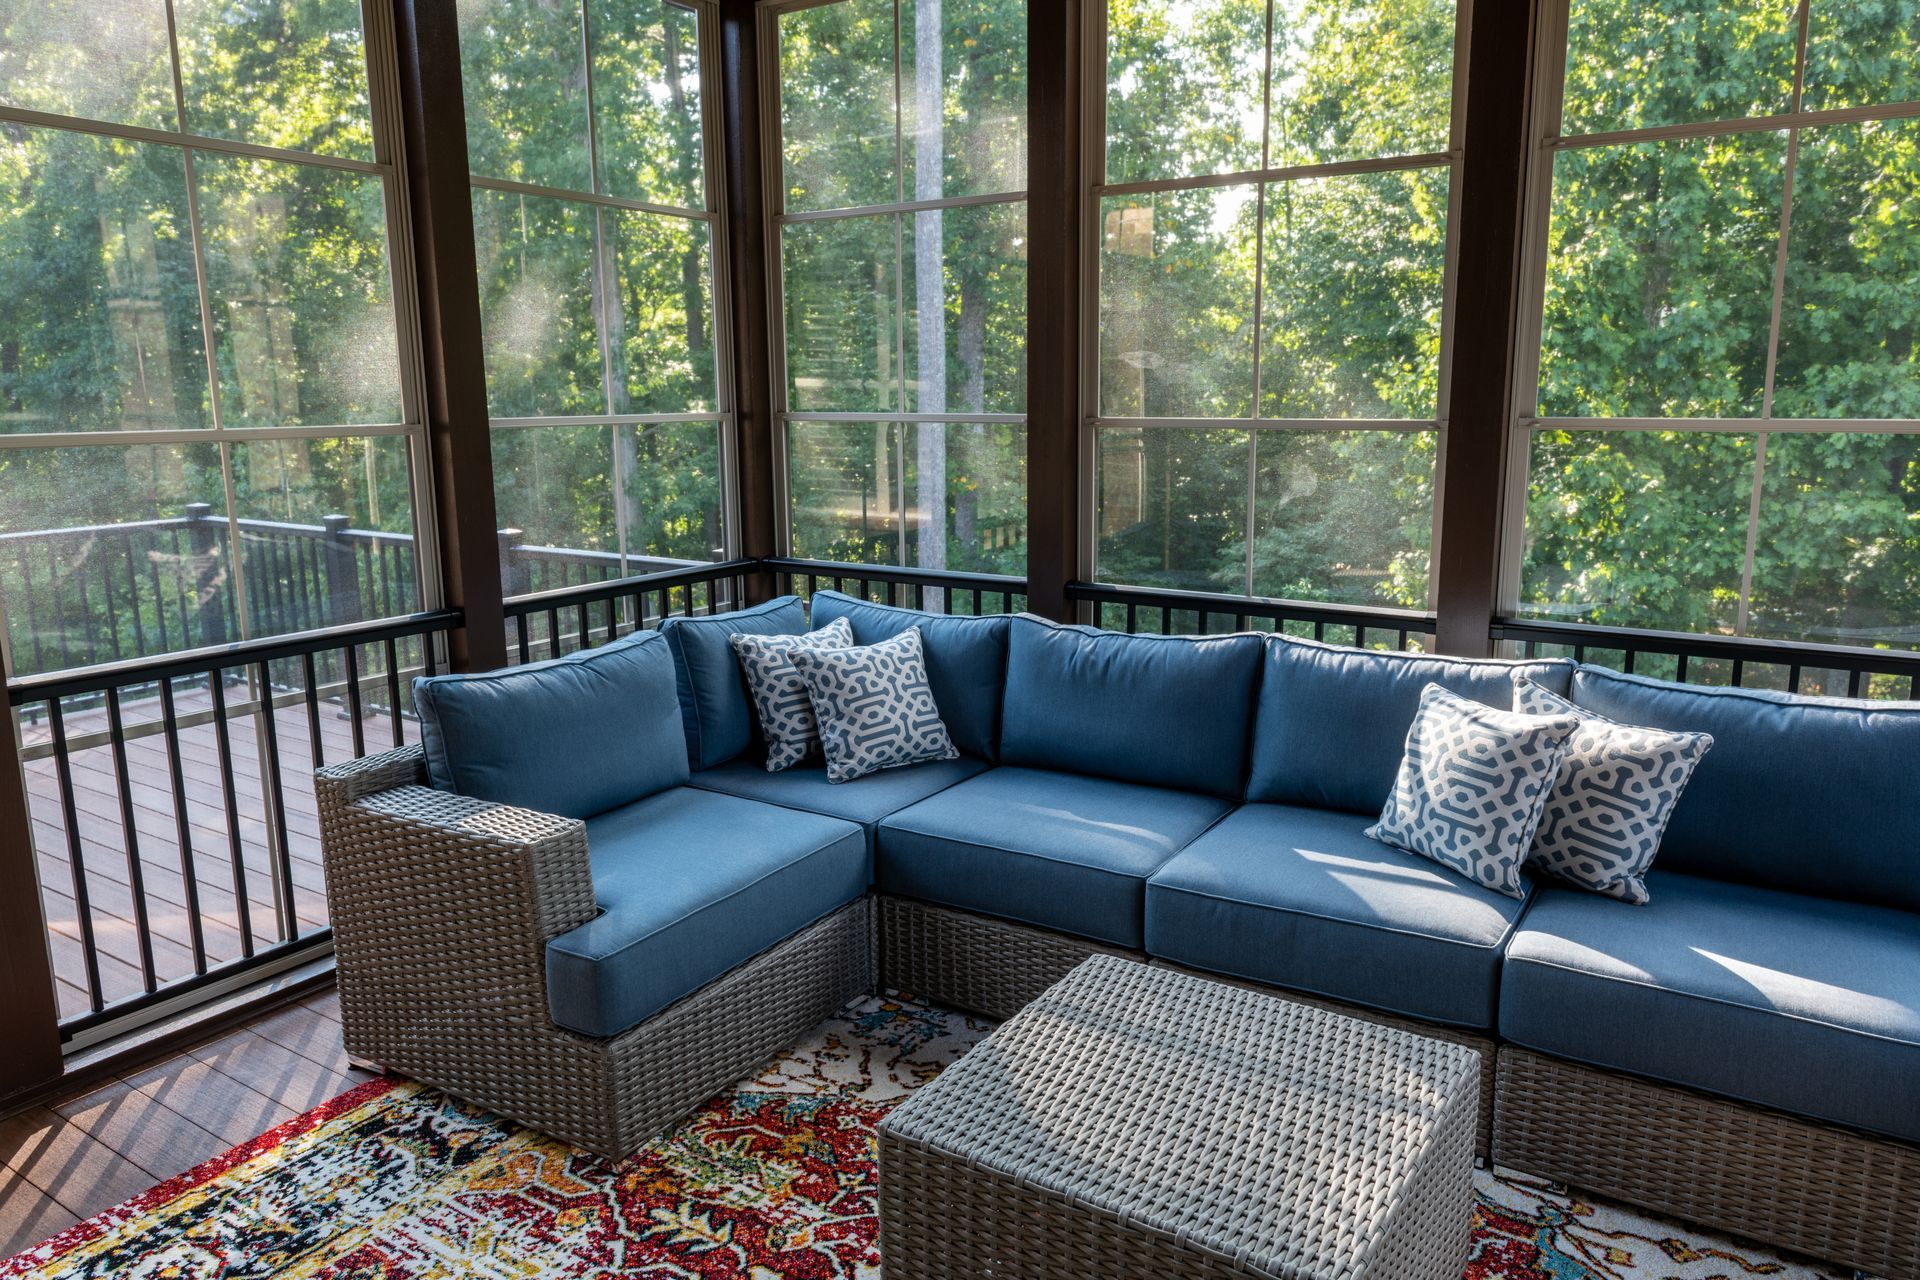 New modern screened porch with patio furniture